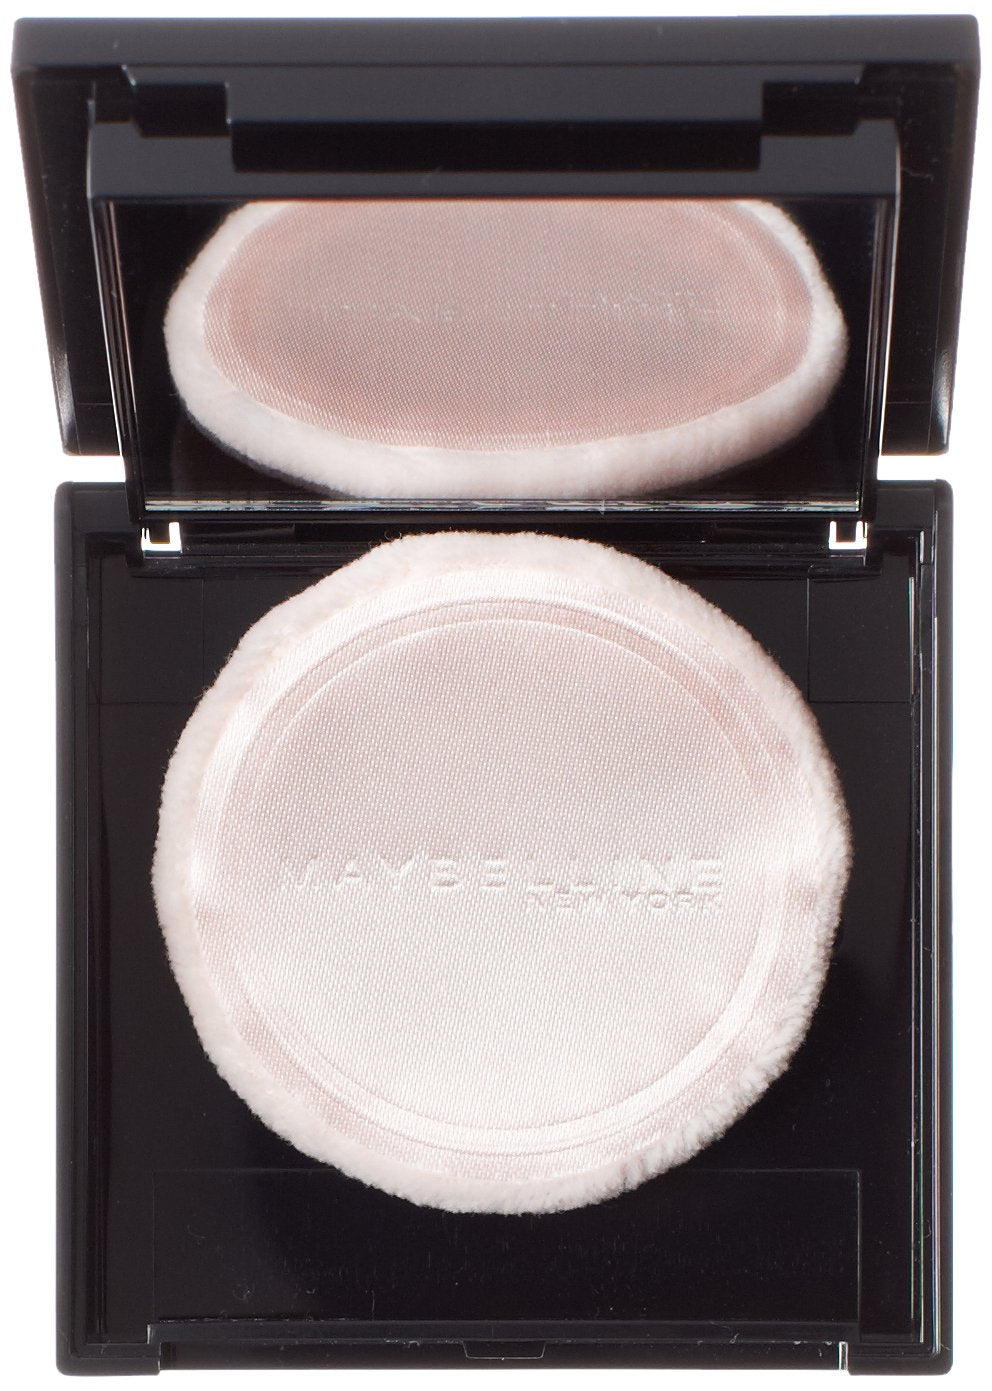 Maybelline New York Fit Me! Pressed Powder, 360 Mocha, 0.3 Ounce